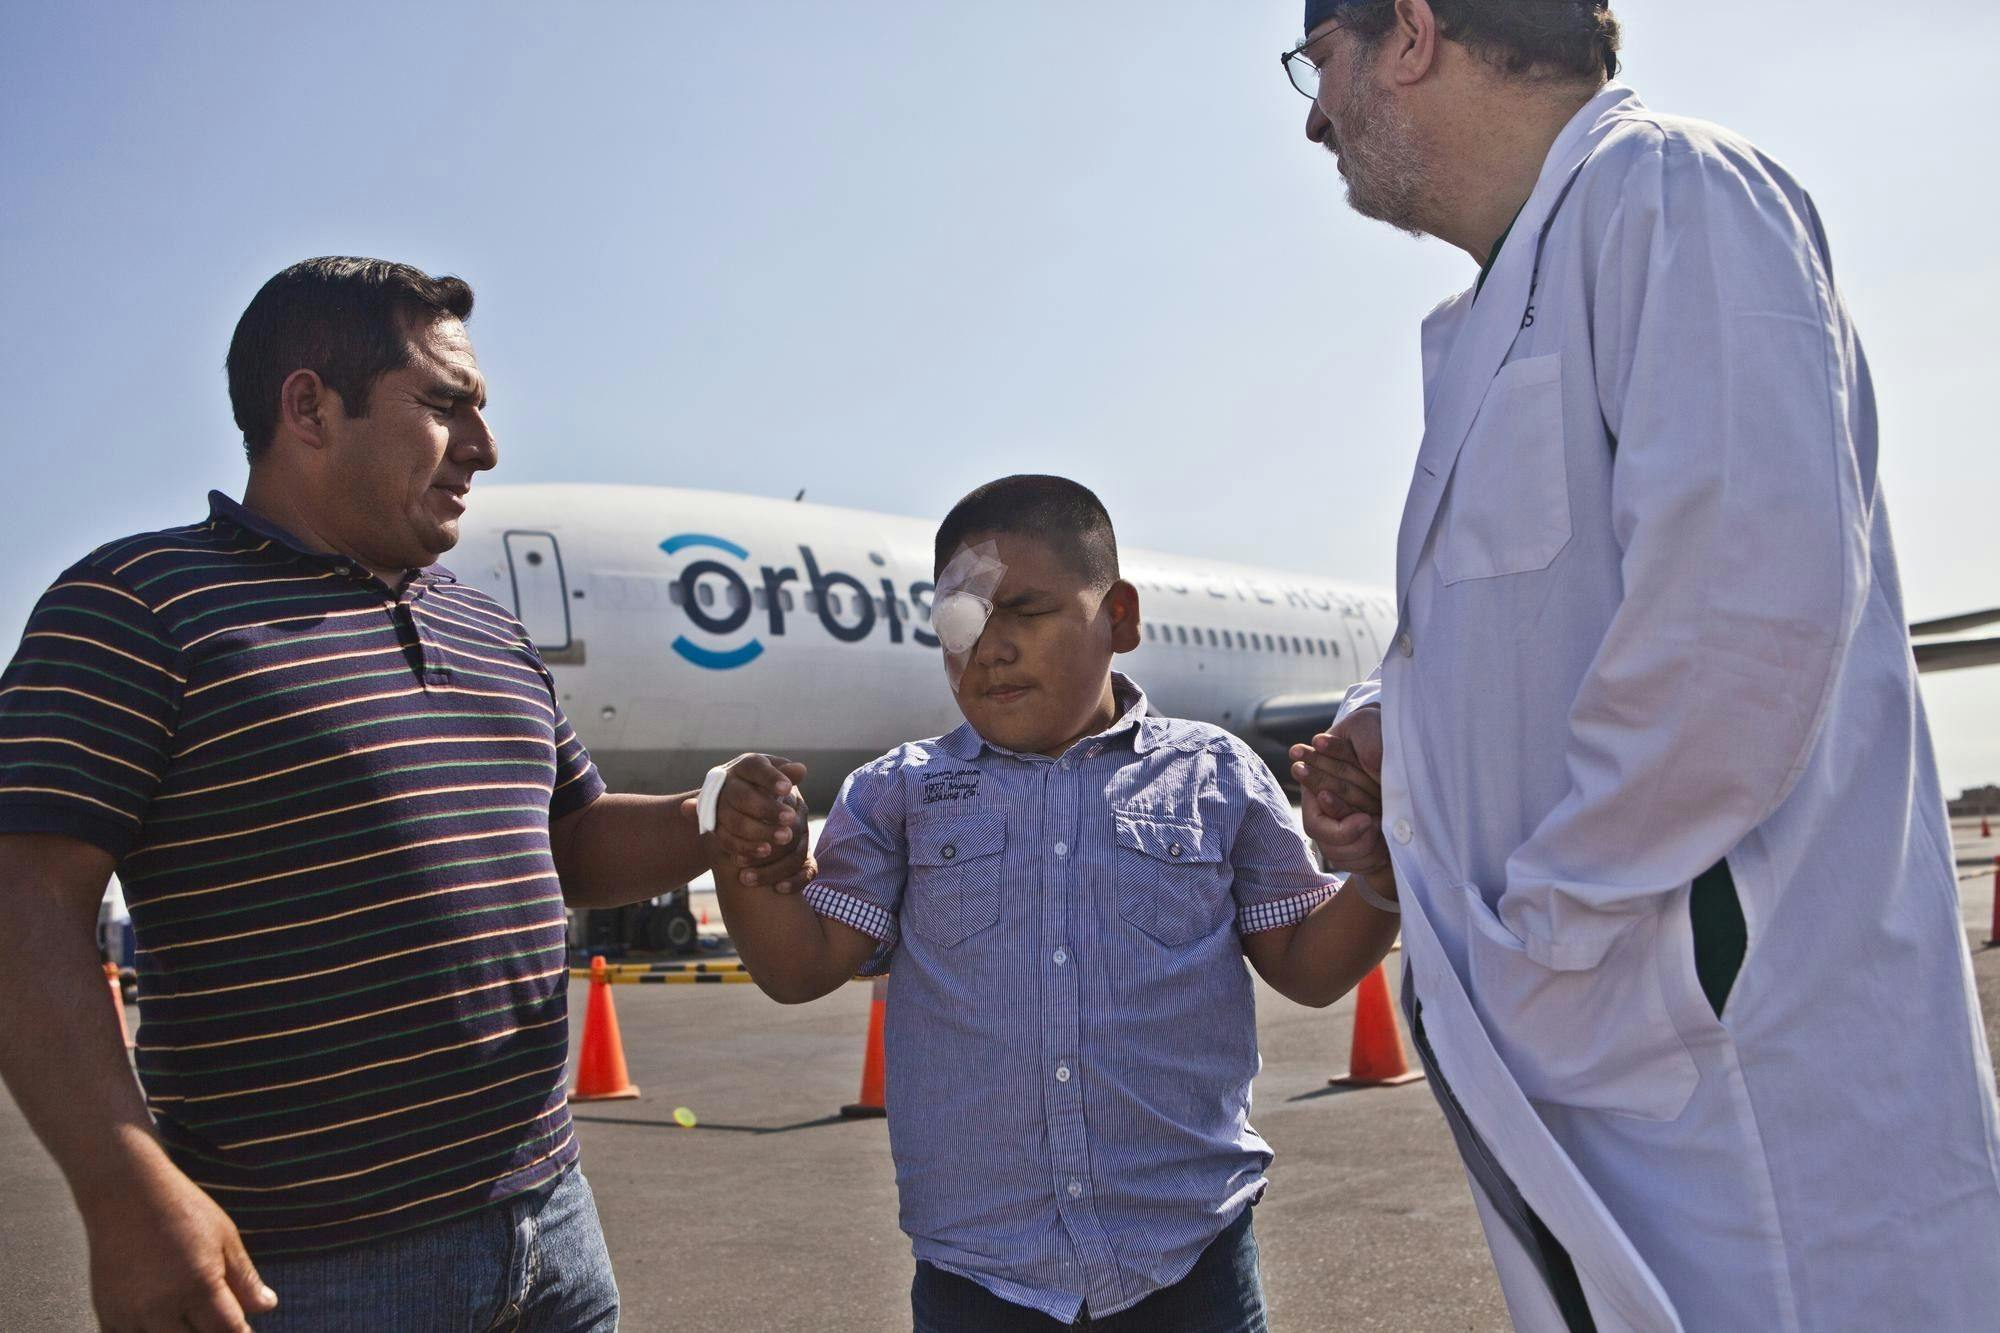 An Orbis Volunteer Faculty member, James Brandt, MD, of UC Davis, accompanies Giancarlo, 10, who received surgery for glaucoma during a Flying Eye Hospital project in Peru in 2014. During a training project commencing today, Orbis’s clinical staff and volunteer medical professionals along with UC Davis Health experts will share their knowledge with nearly 50 eye care professionals from Latin America, helping them fight avoidable blindness in their communities. (Image courtesy of Geoff Oliver Bugbee/Orbis)